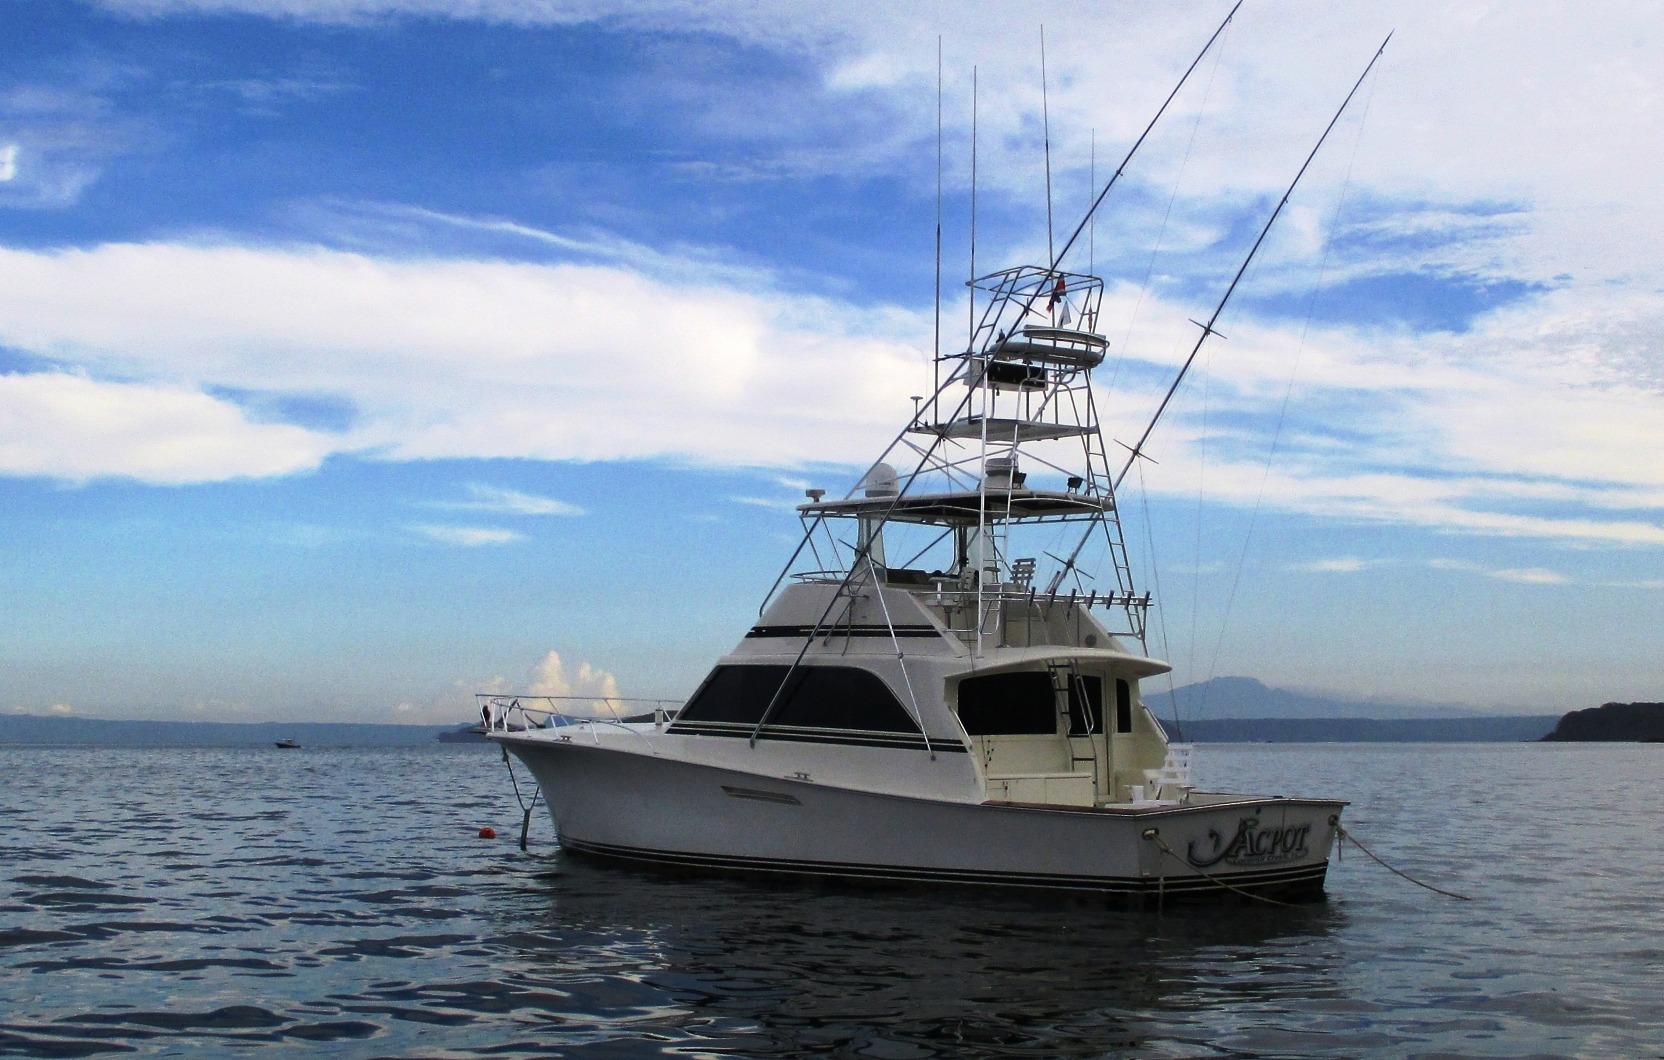 About Costa Rica Fishing Charters